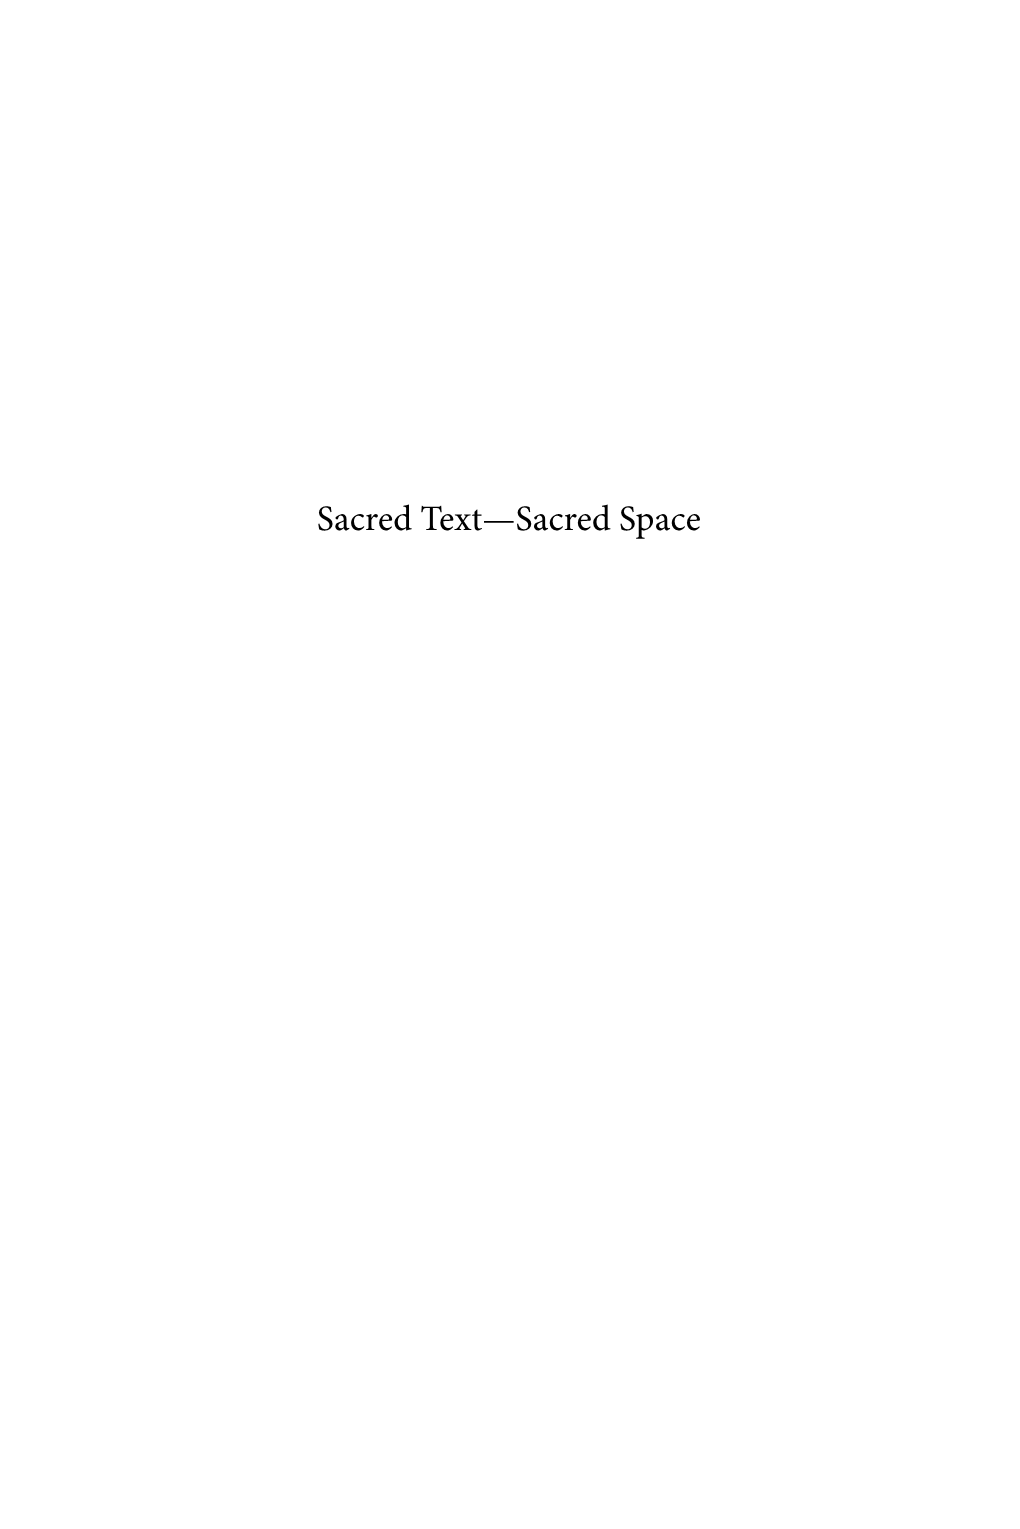 Sacred Text—Sacred Space Studies in Religion and the Arts